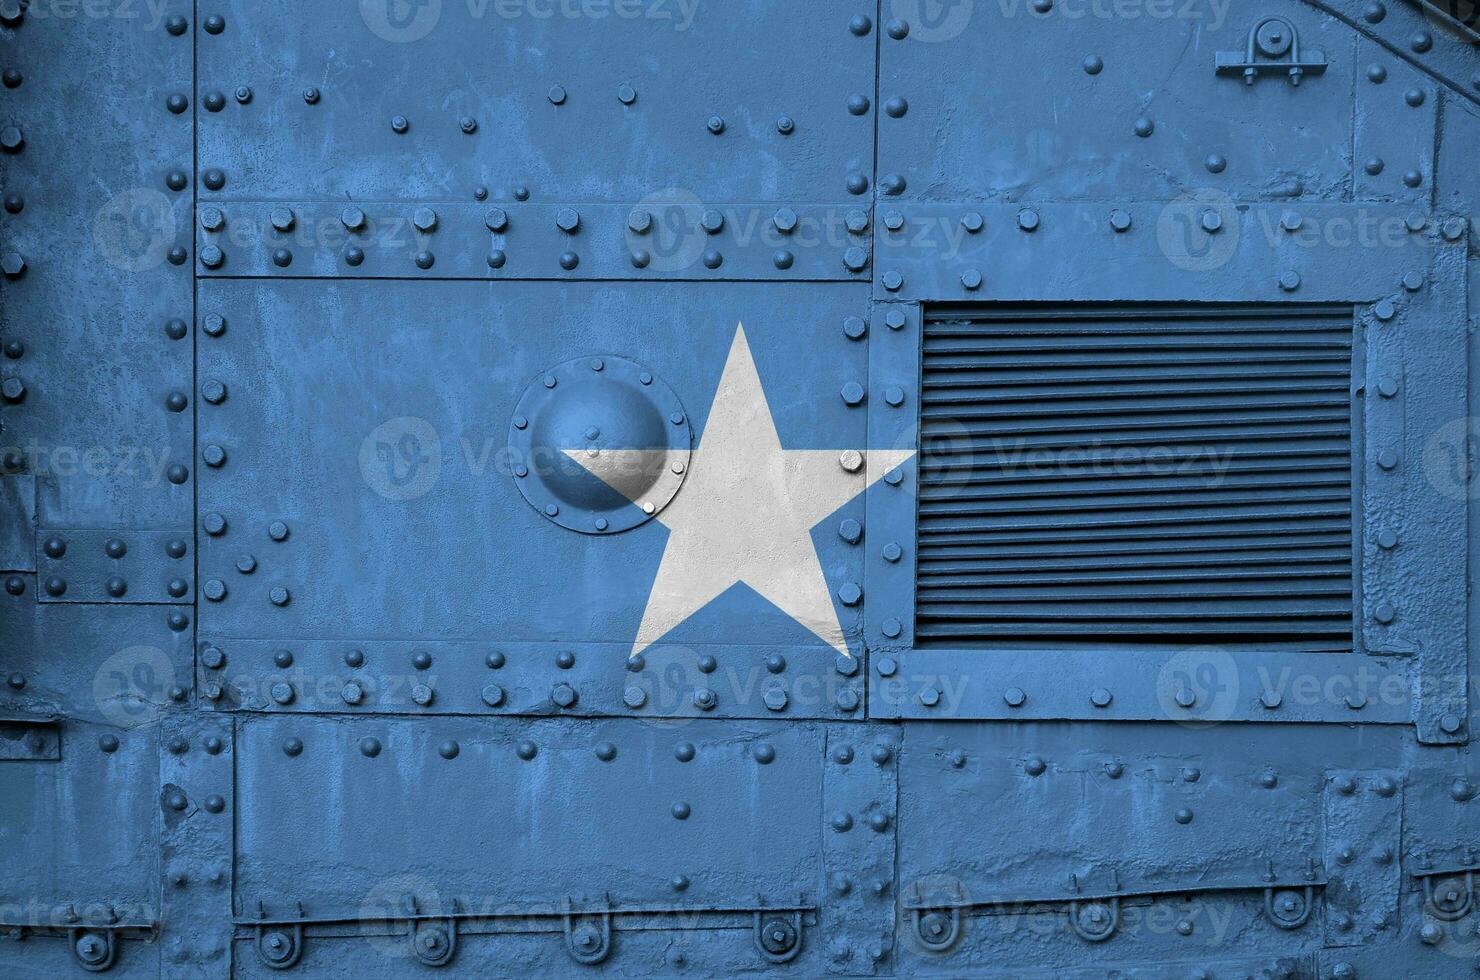 Somalia flag depicted on side part of military armored tank closeup. Army forces conceptual background photo